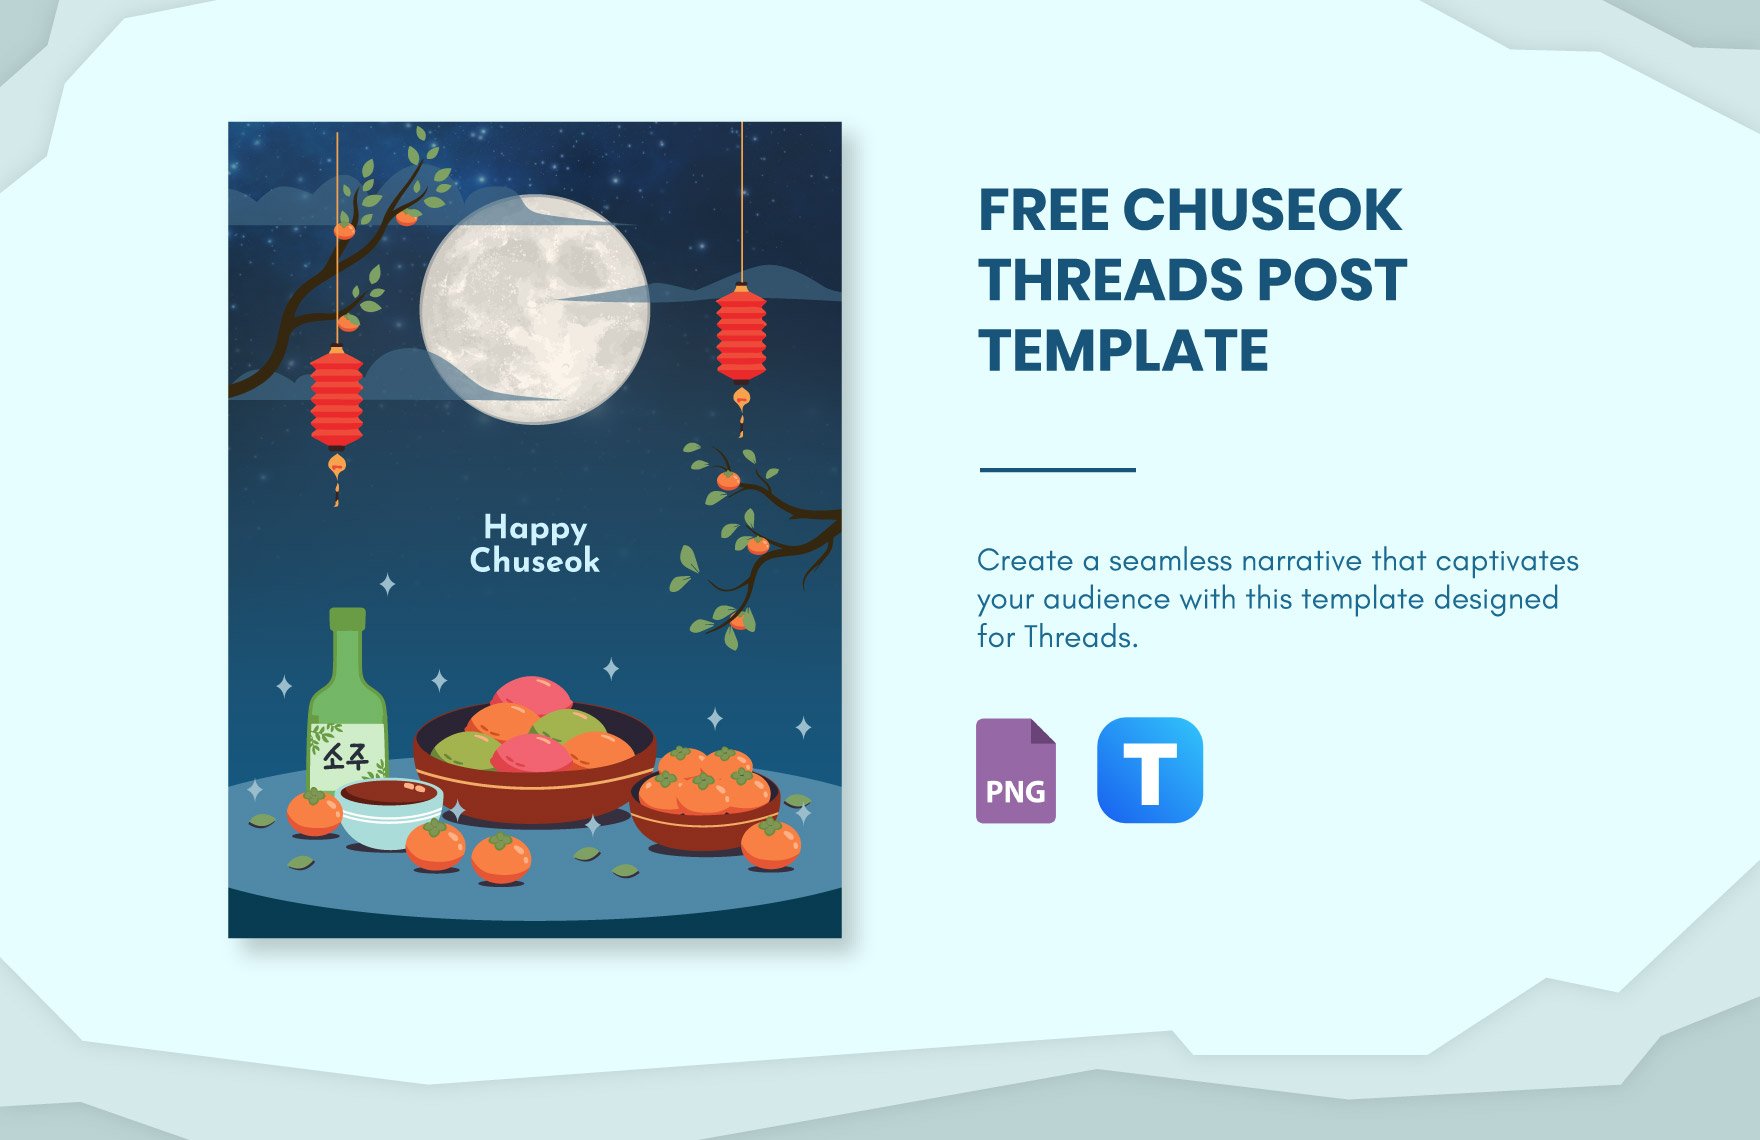 Free Chuseok Threads Post Template in PNG